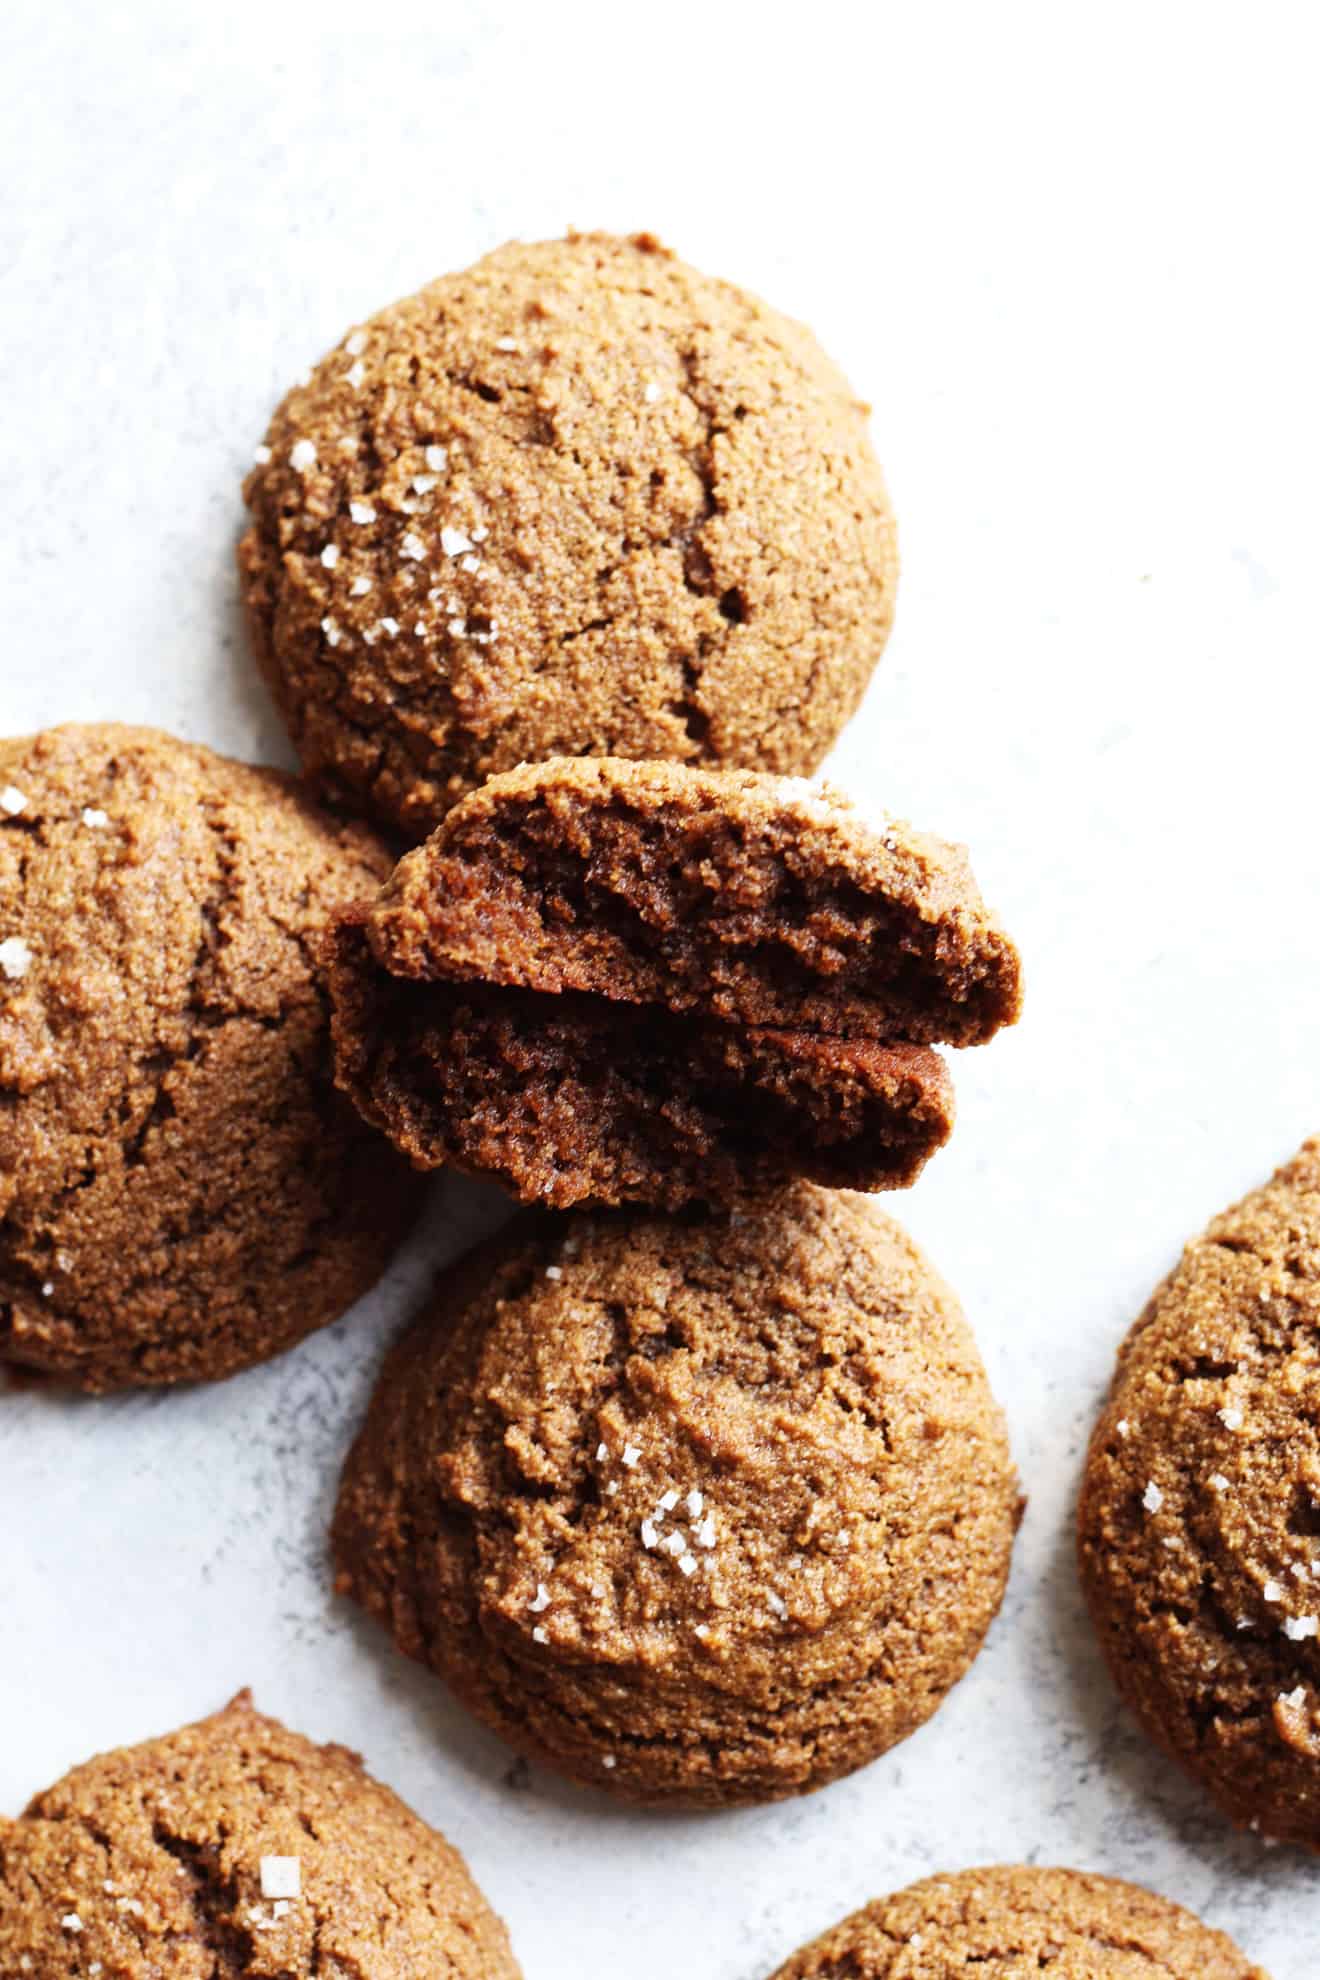 overhead image of soft ginger cookies on a white counter, one cookie is broke in half and layered on top of itself so you can see the inside. The broke cookie lays against other ginger molasses cookies.